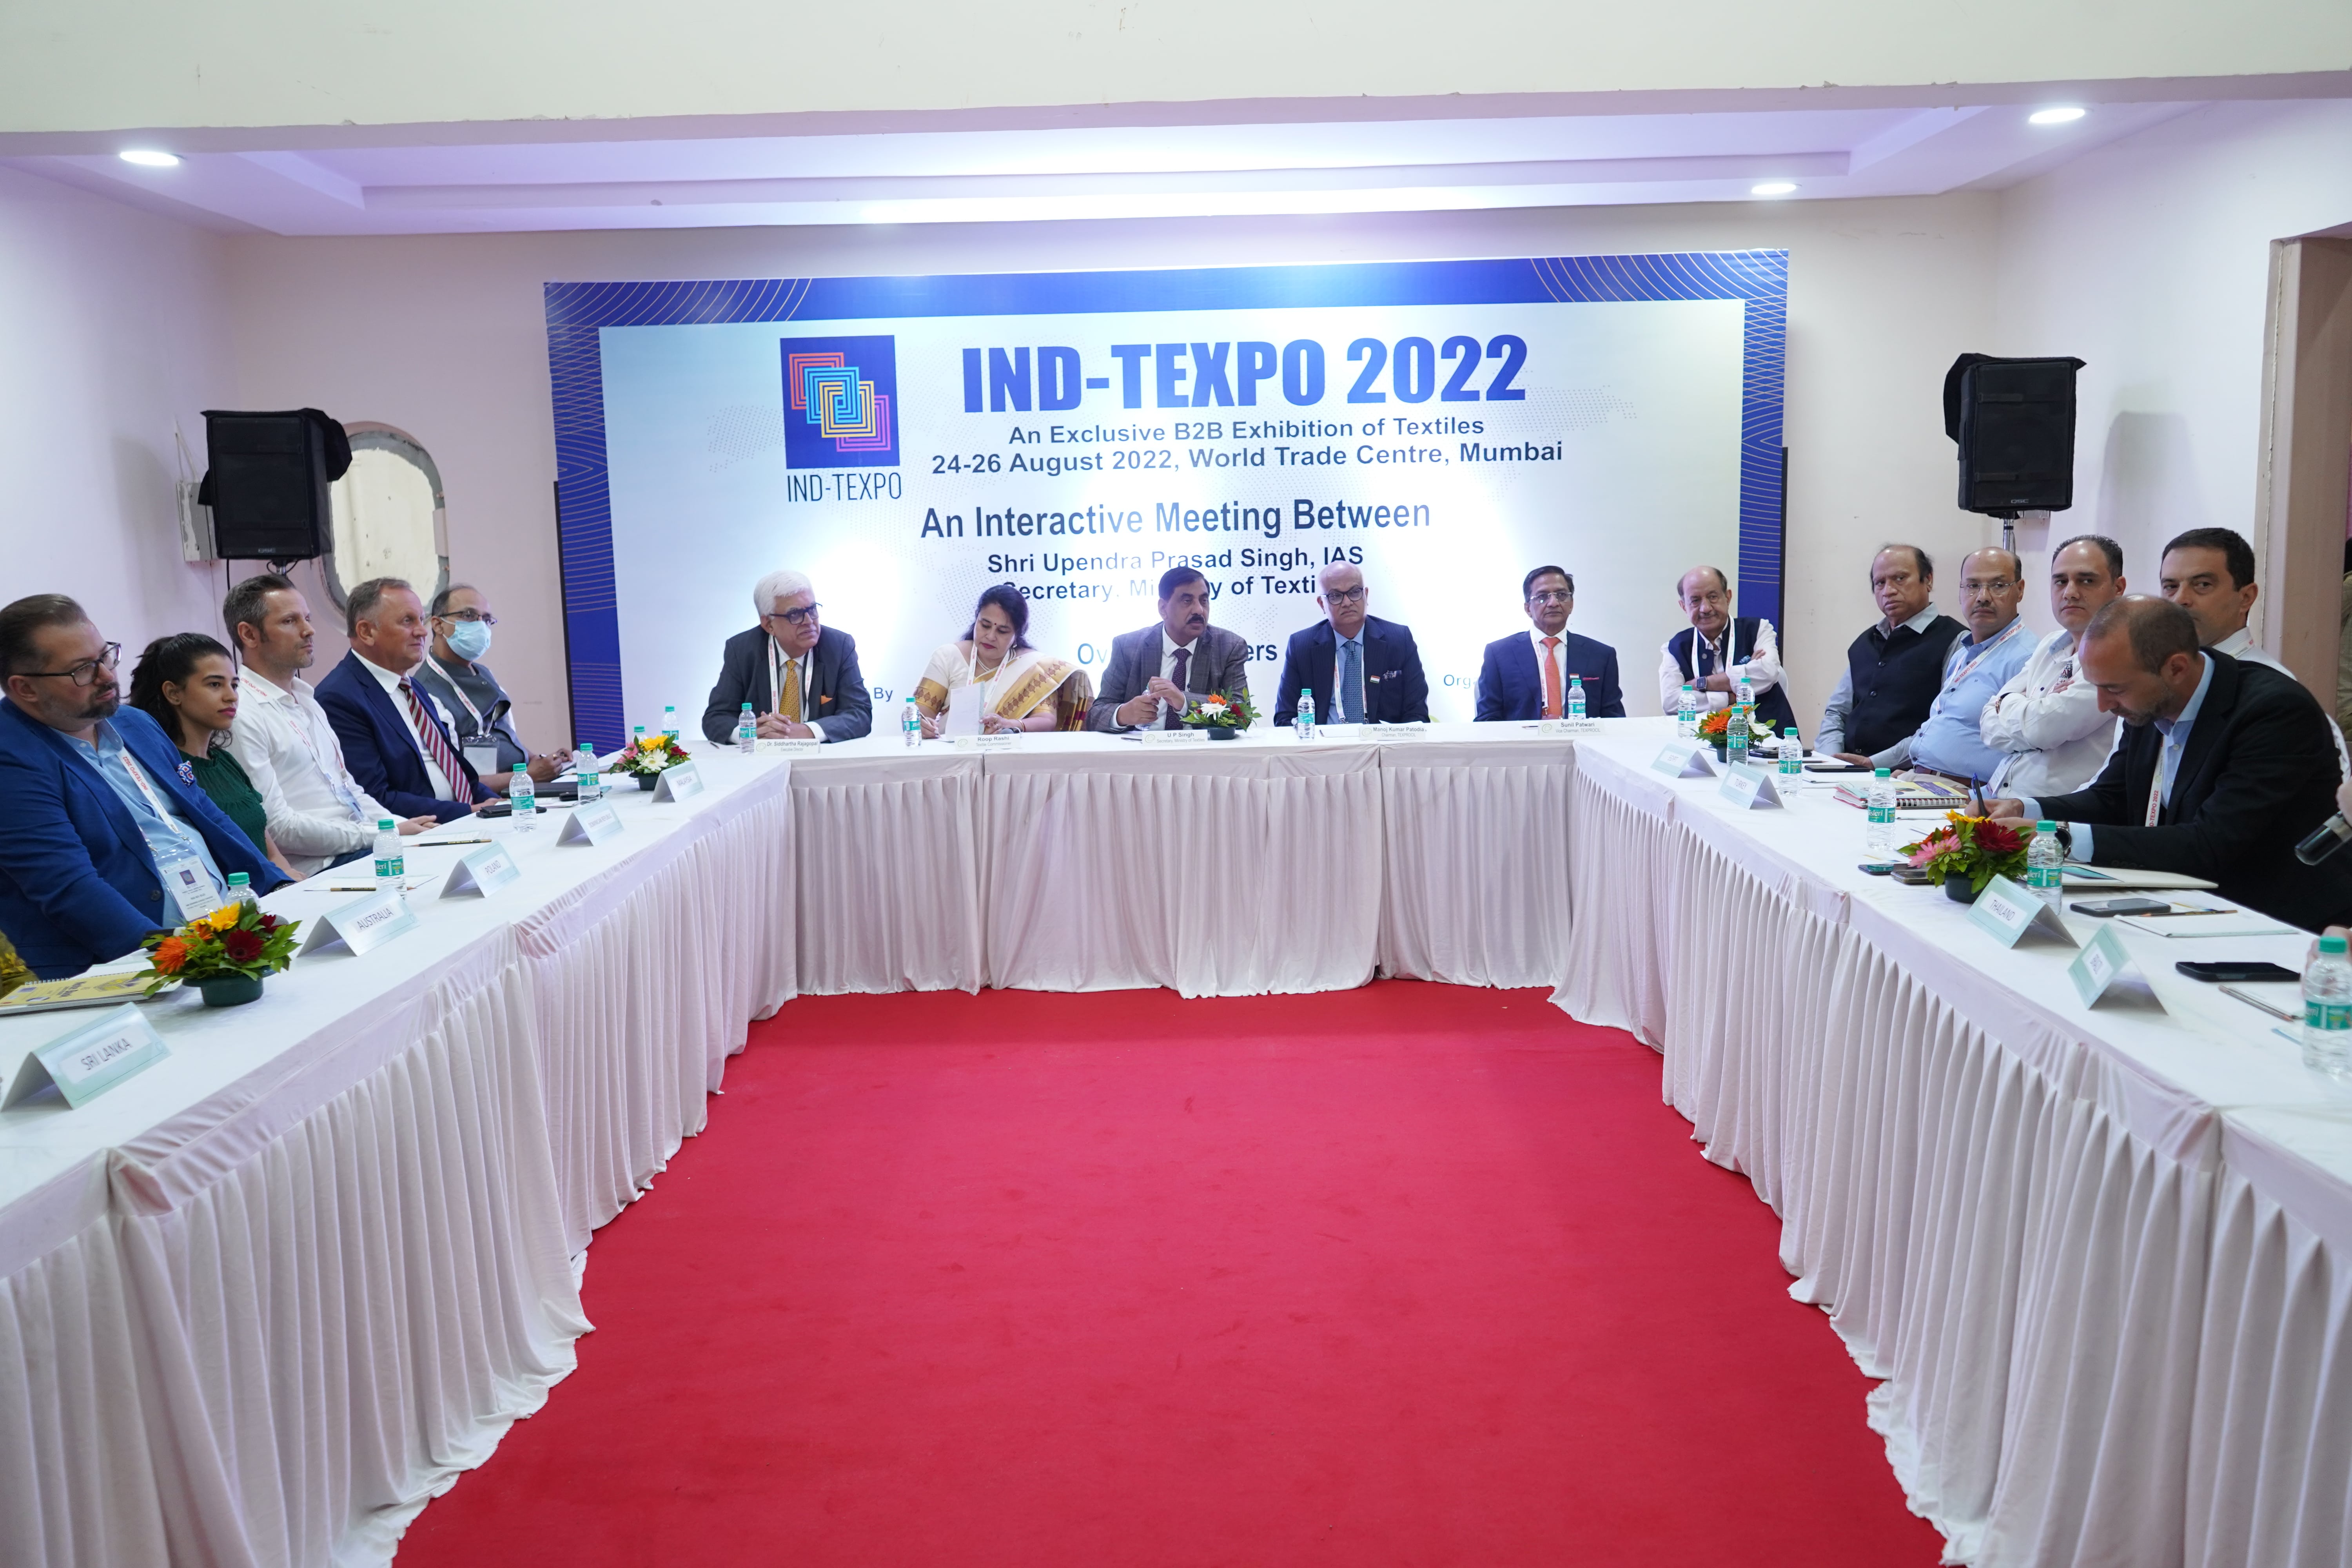 Shri Upendra Prasad Singh, Secretary Textiles @ the Interactive Meeting with the Foreign Buyers at “Ind-Texpo” Show organised by TEXPROCIL at World Trade Centre, Mumbai on 24th August 2022